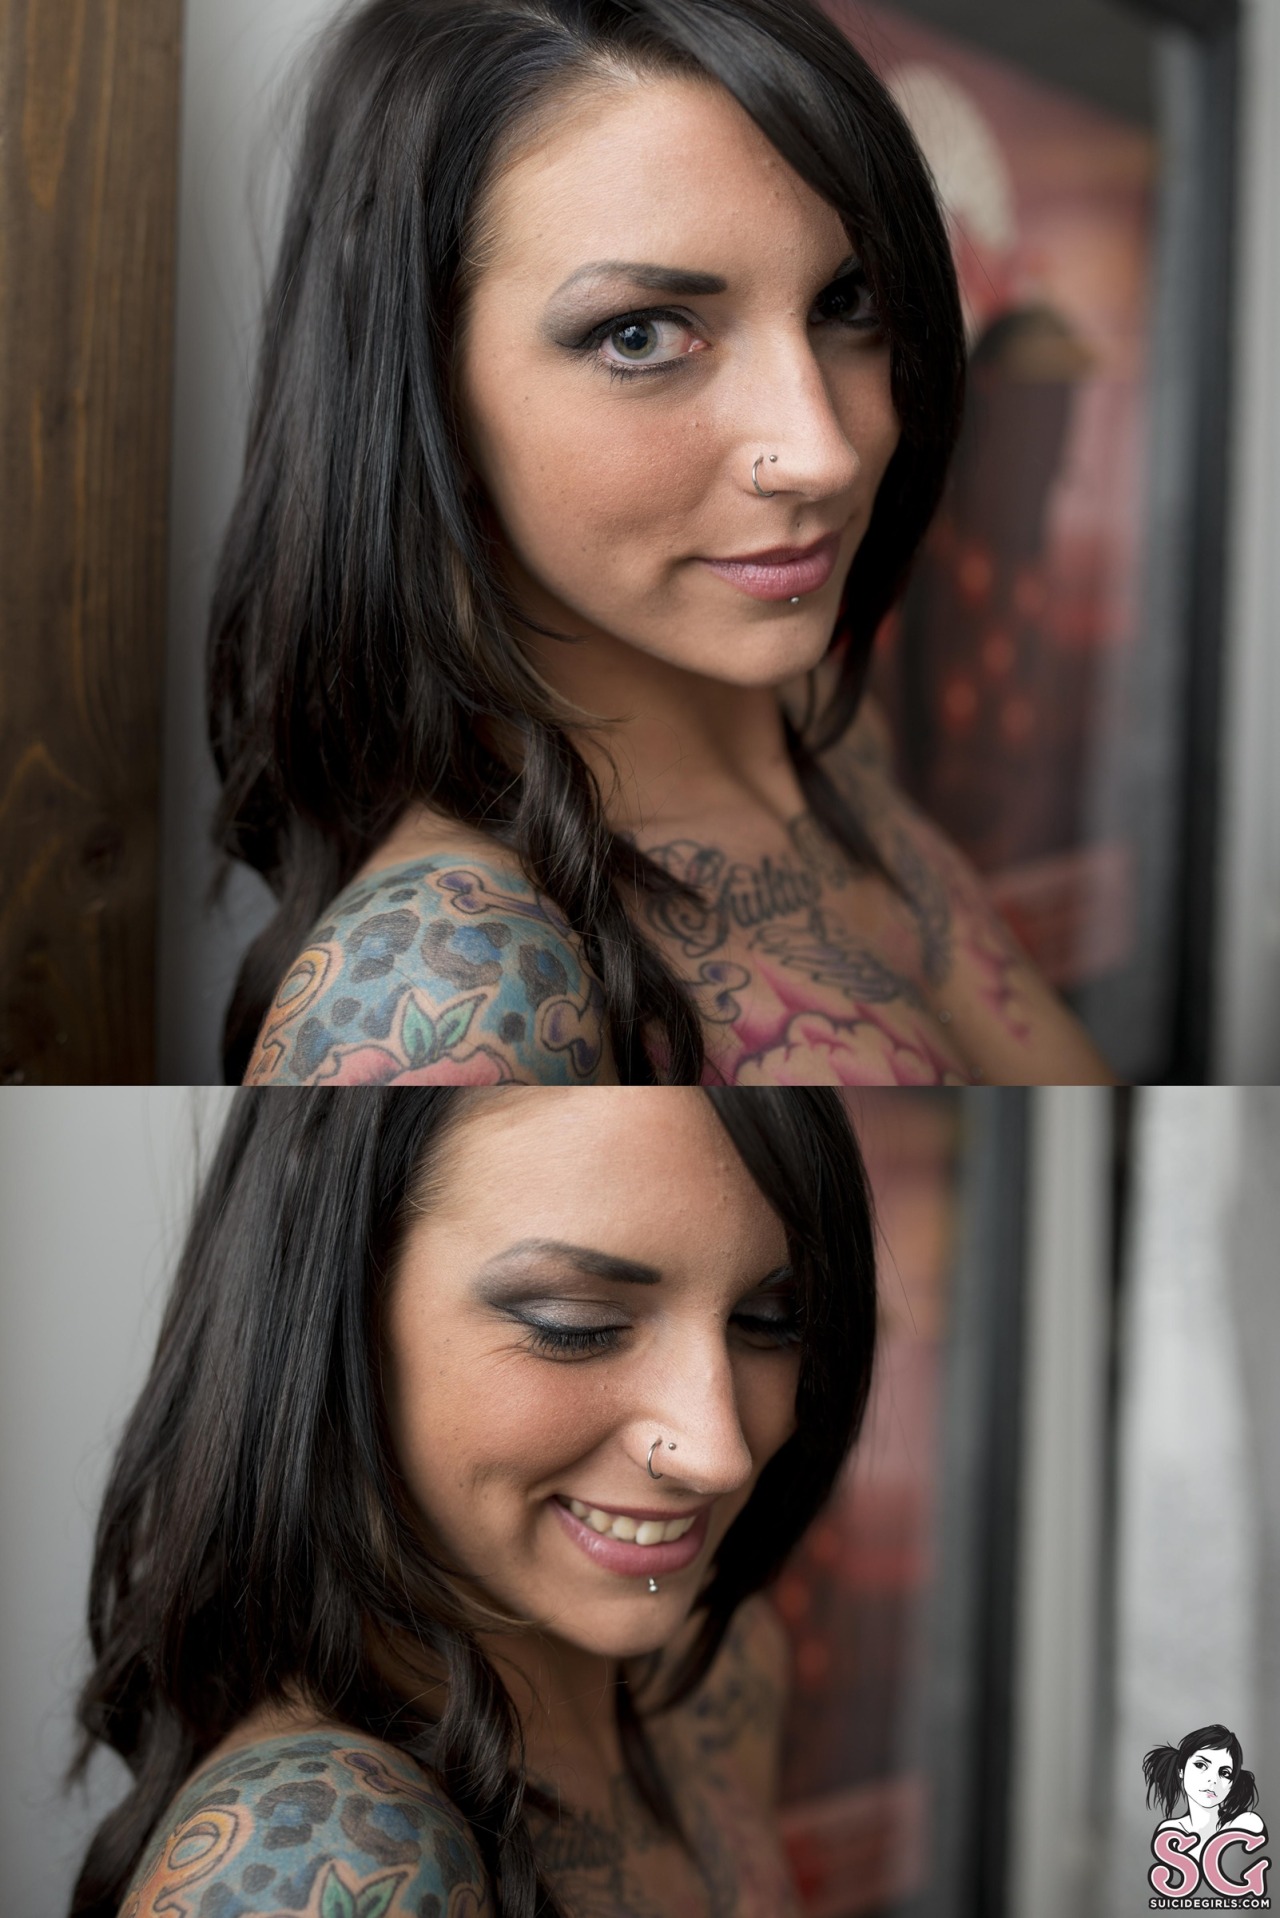 Helen Jade (Angleterre/England) - Pure MorningPhotos for Suicide Girls.If you are